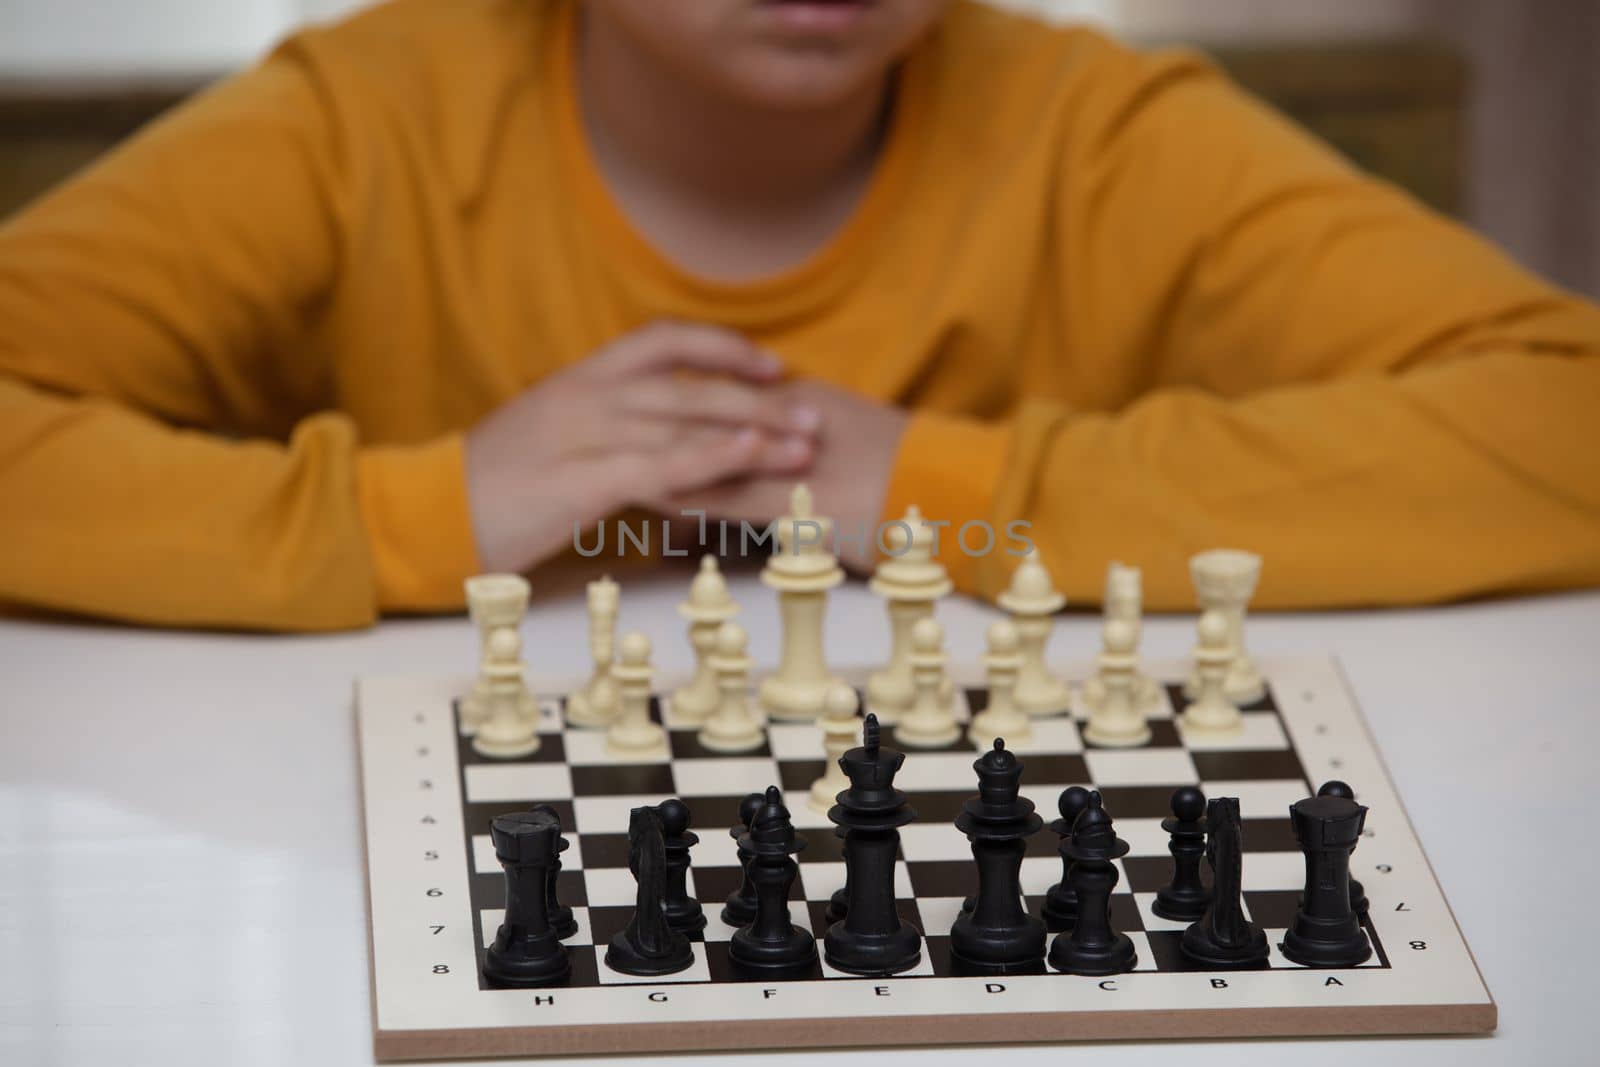 Chess board on table in front of school boy thinking of next move, tournament